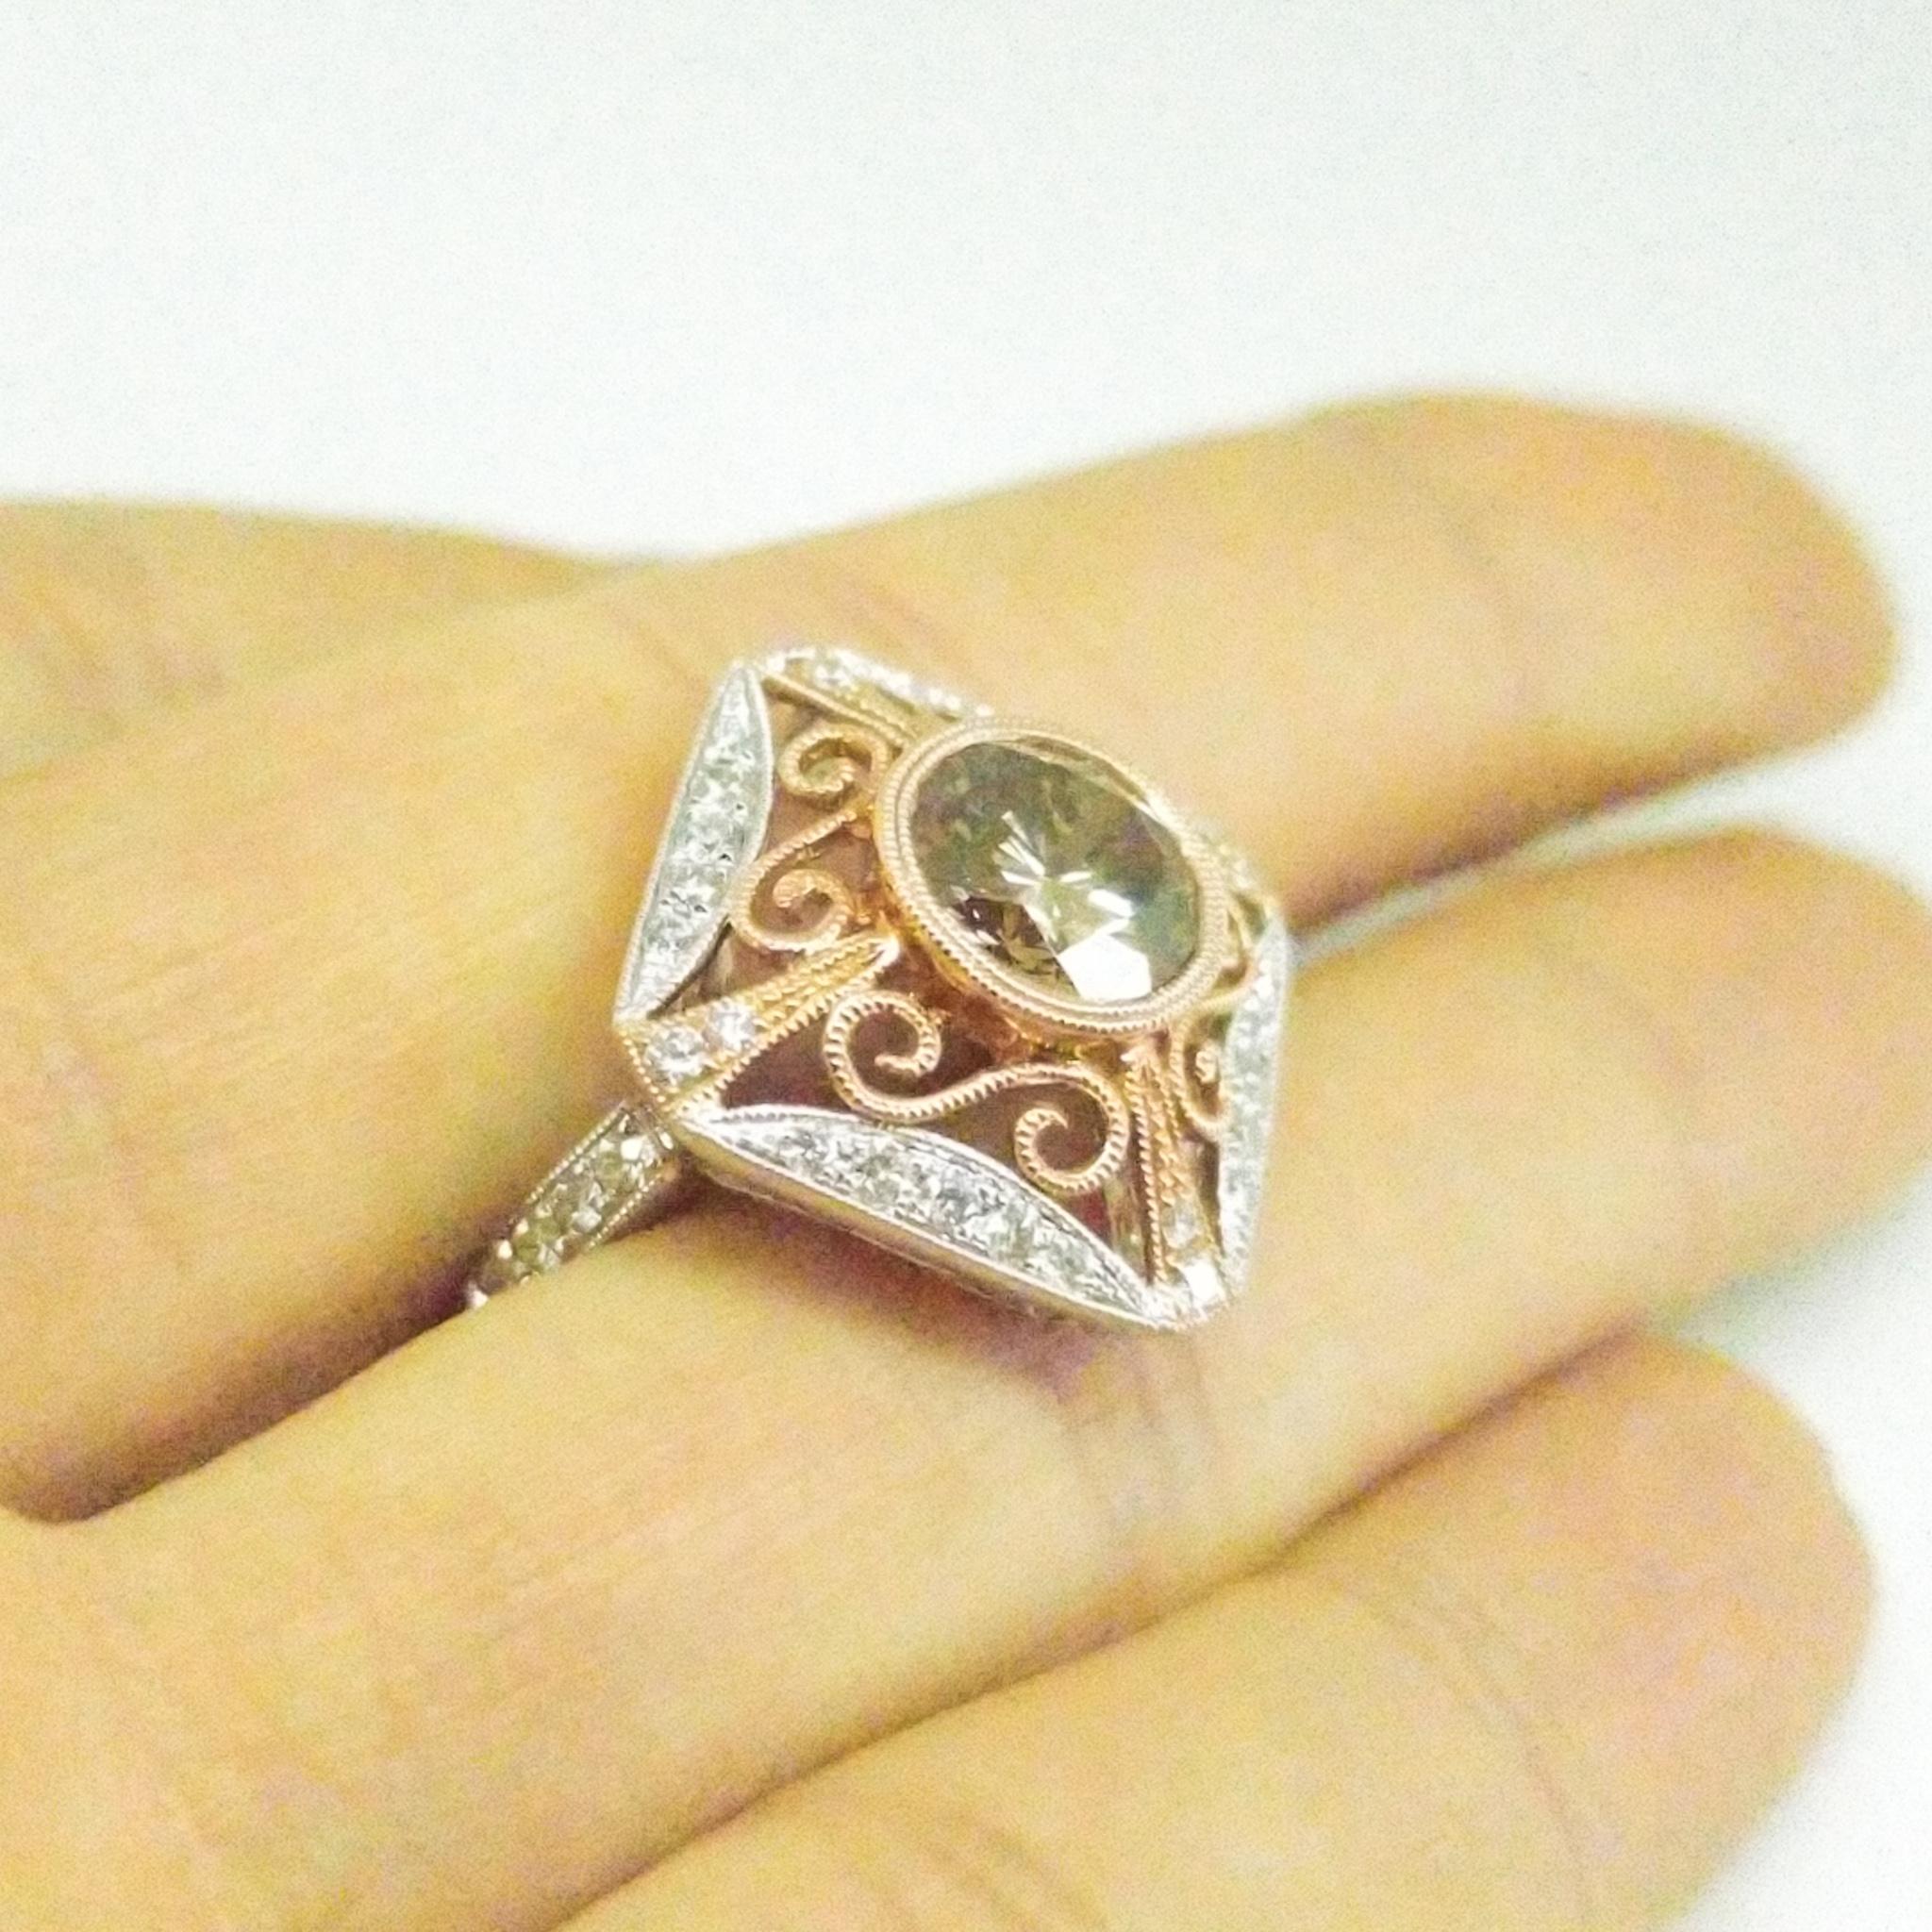 Natural Fancy Champagne Diamond Ring 2.26 Carat Filigree White and Rose Gold For Sale 7